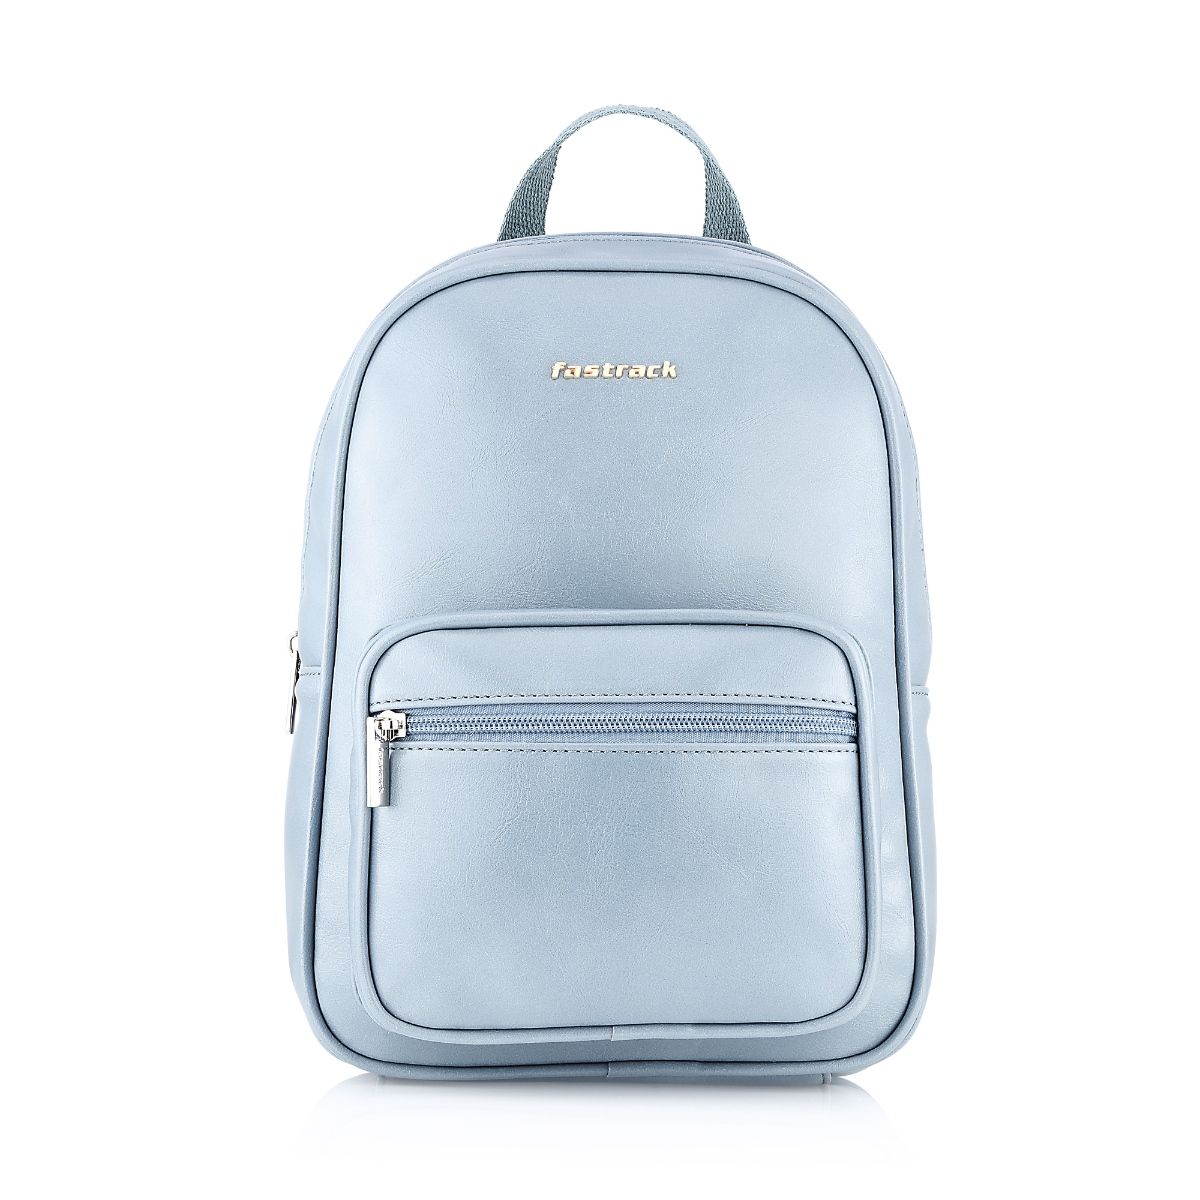 MCM Visetos Light Blue Canvas and Leather Studs Backpack With Dust Bag  #H62507-2 - AbuMaizar Dental Roots Clinic